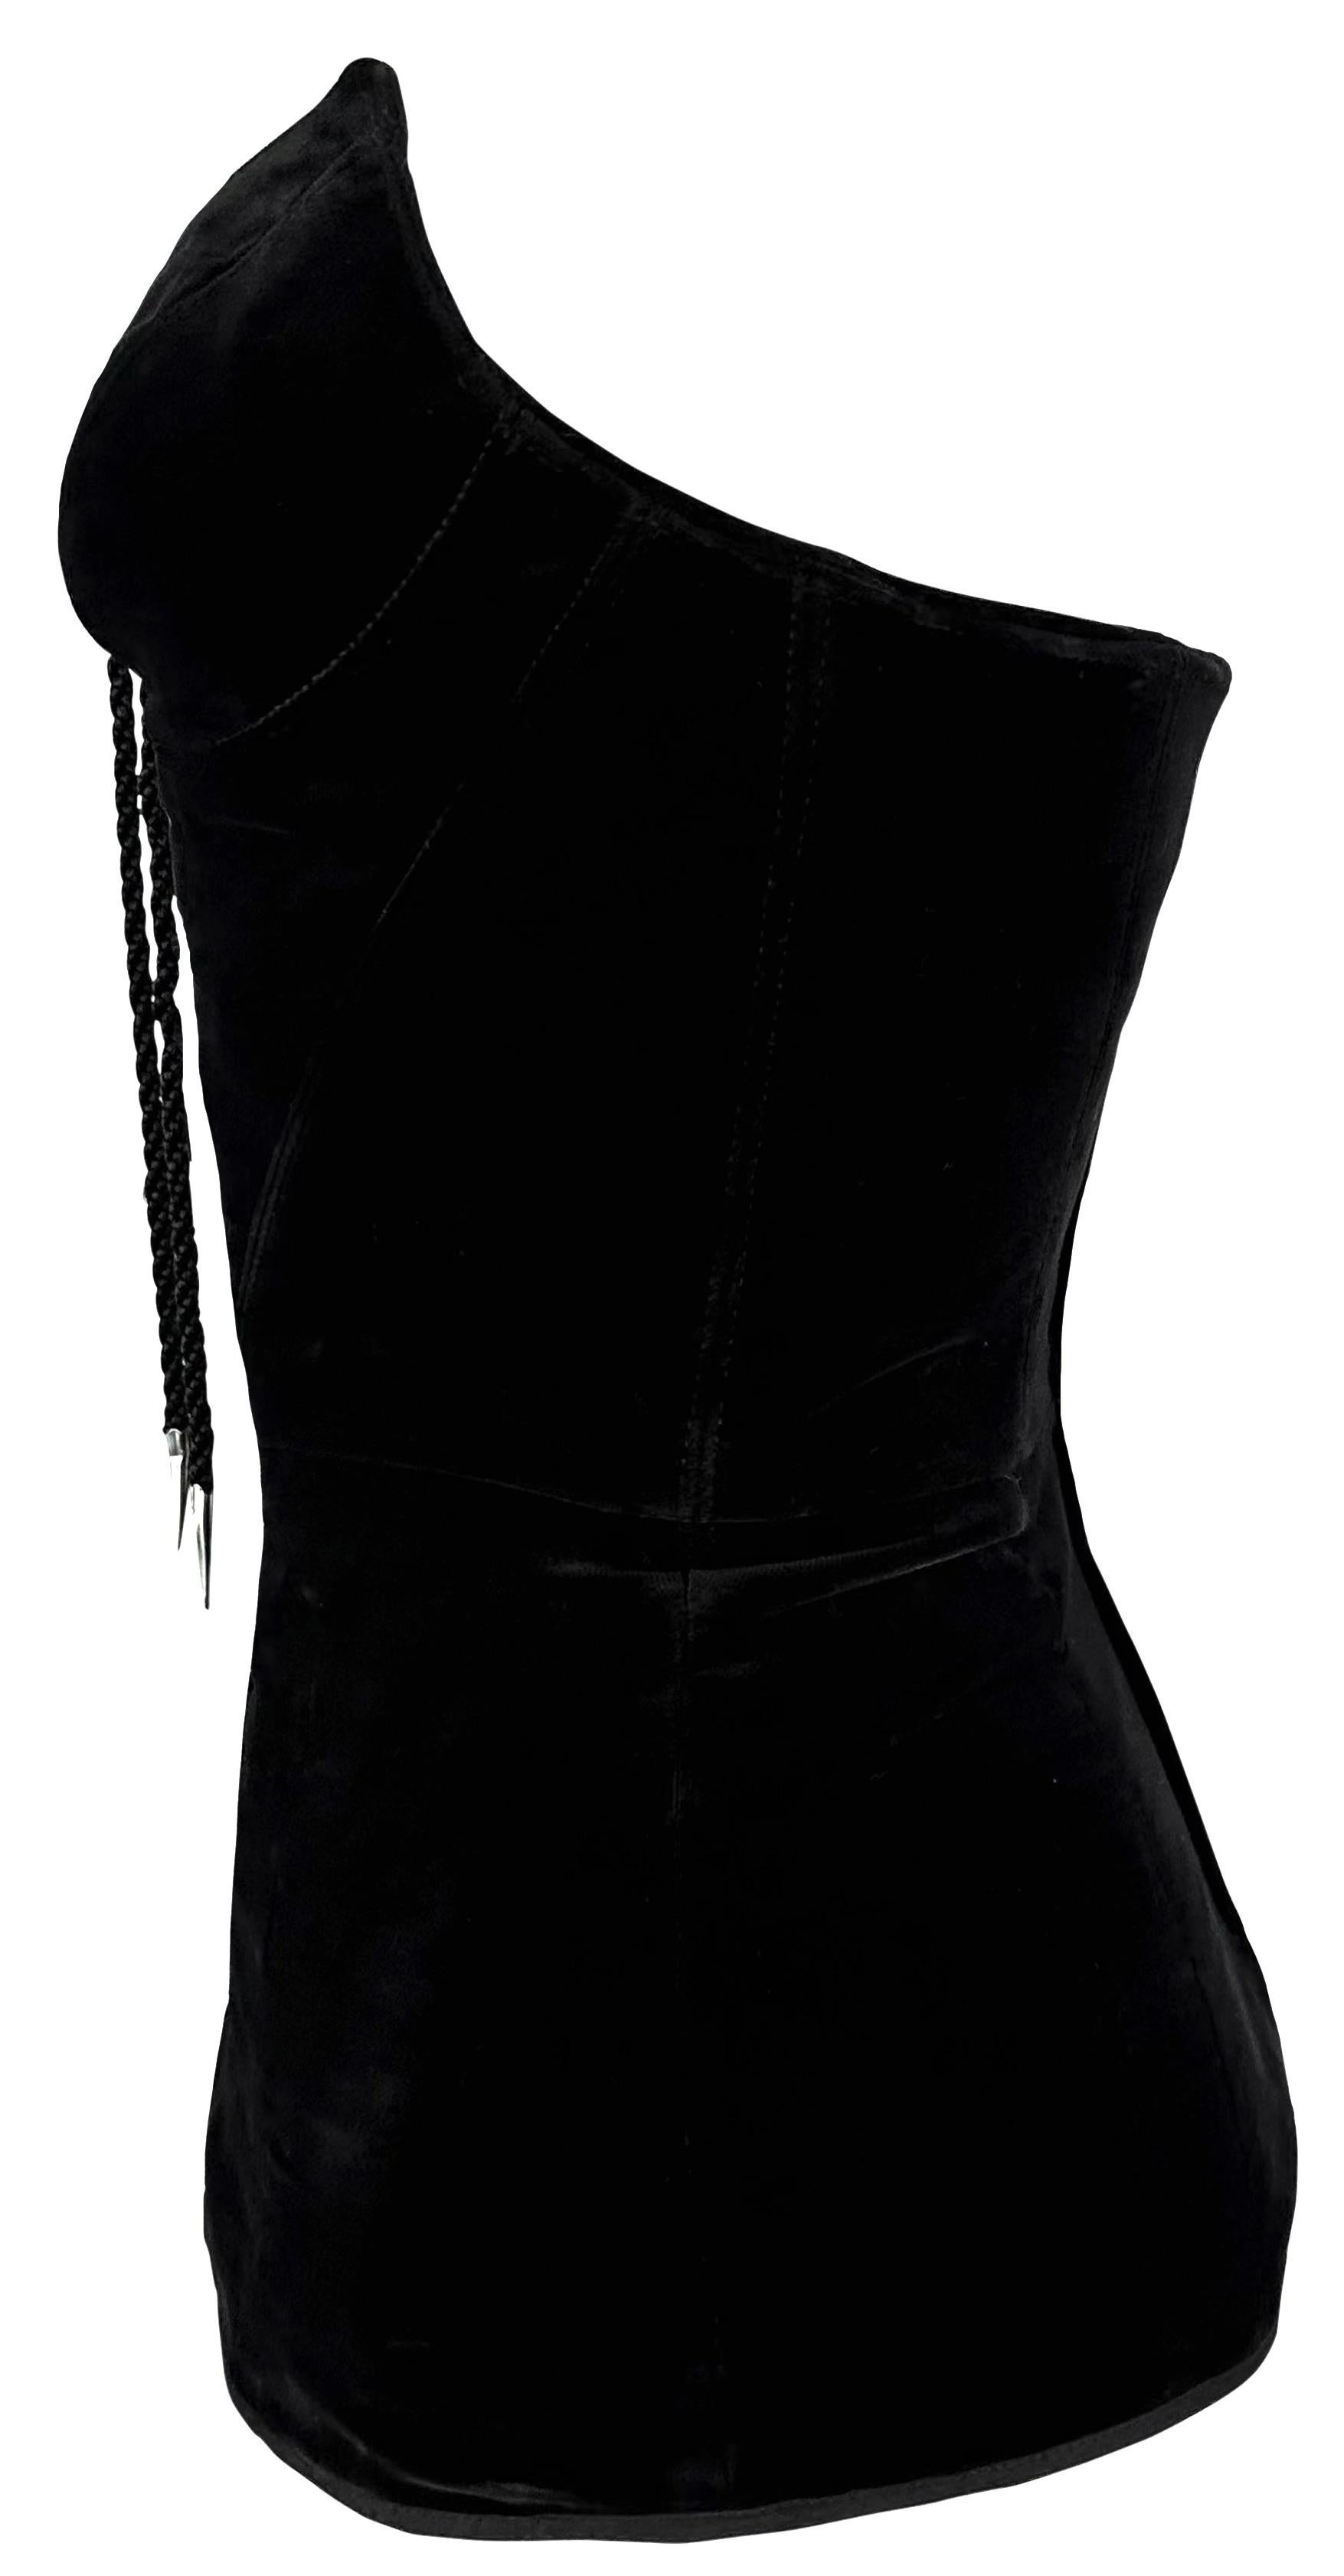 Late 1980s Thierry Mugler Velvet Lace-Up Pointed Strapless Bustier Corset Black For Sale 2